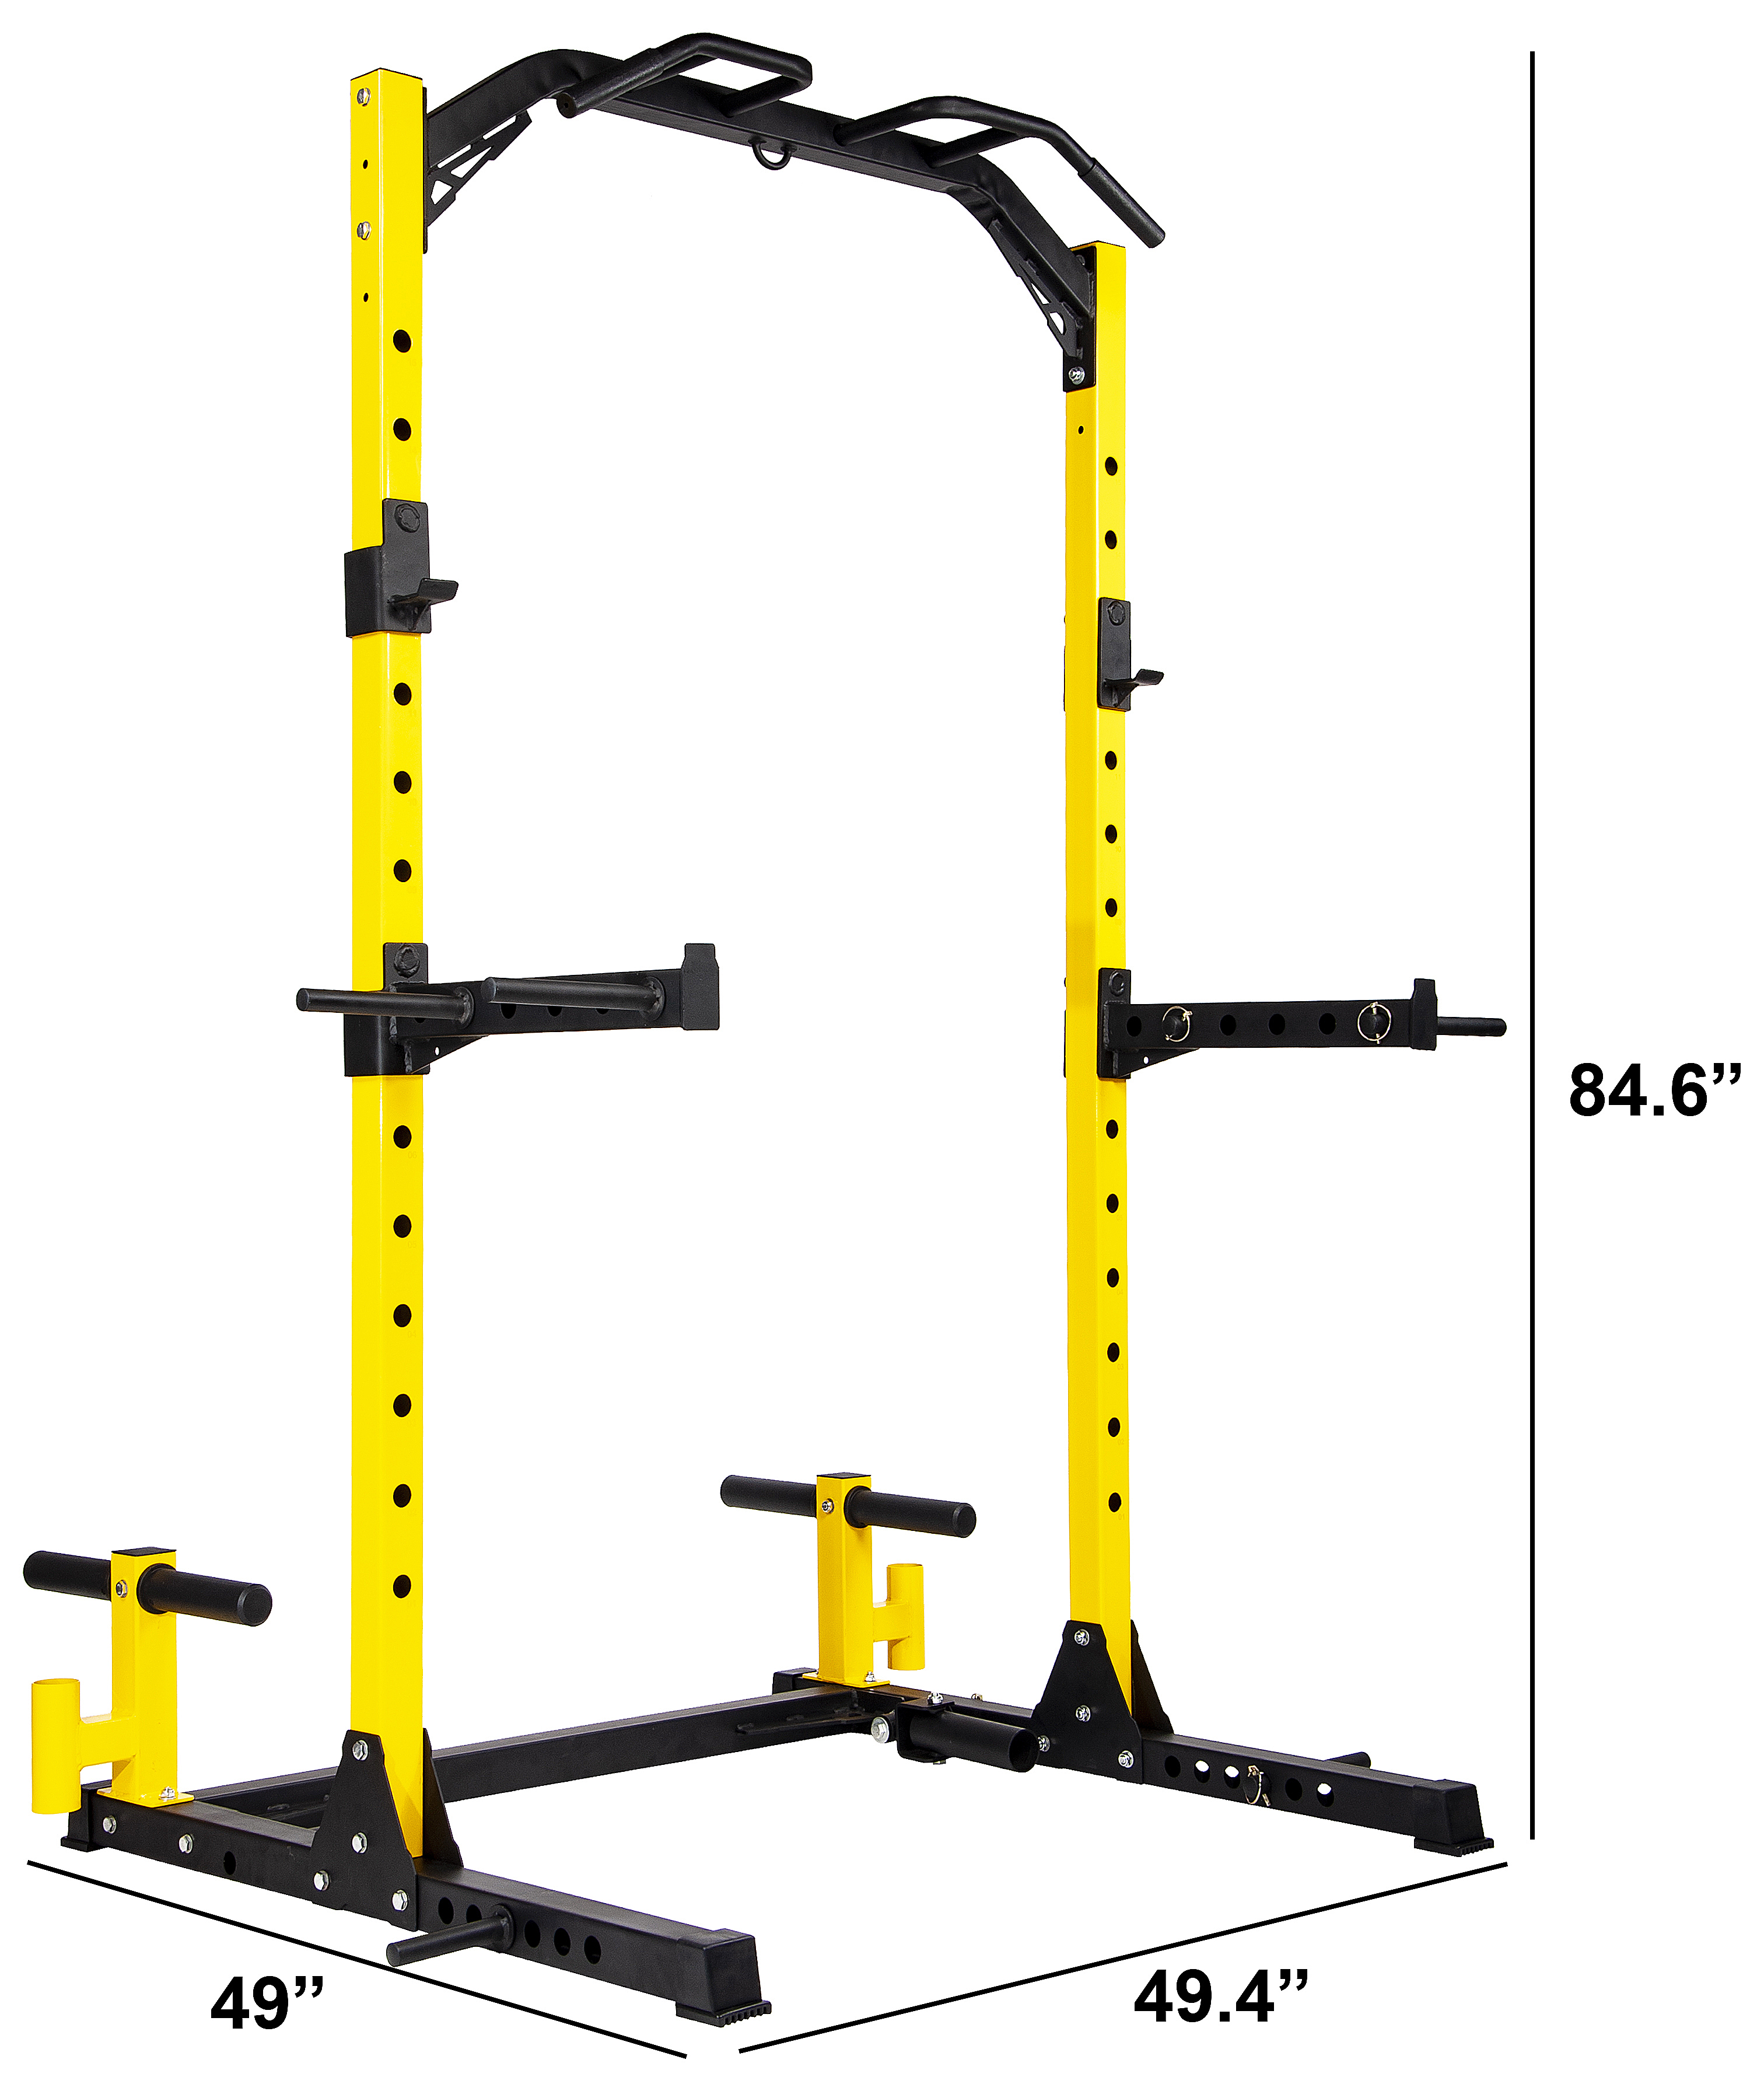 BalanceFrom 1000-Pound Capacity Multi-Function Adjustable Power Rack Squat Stand with Safety Spotter Arms, Dip Bars, Weight Plate Holders, Barbell Holders and Landmine Attachment - image 4 of 8